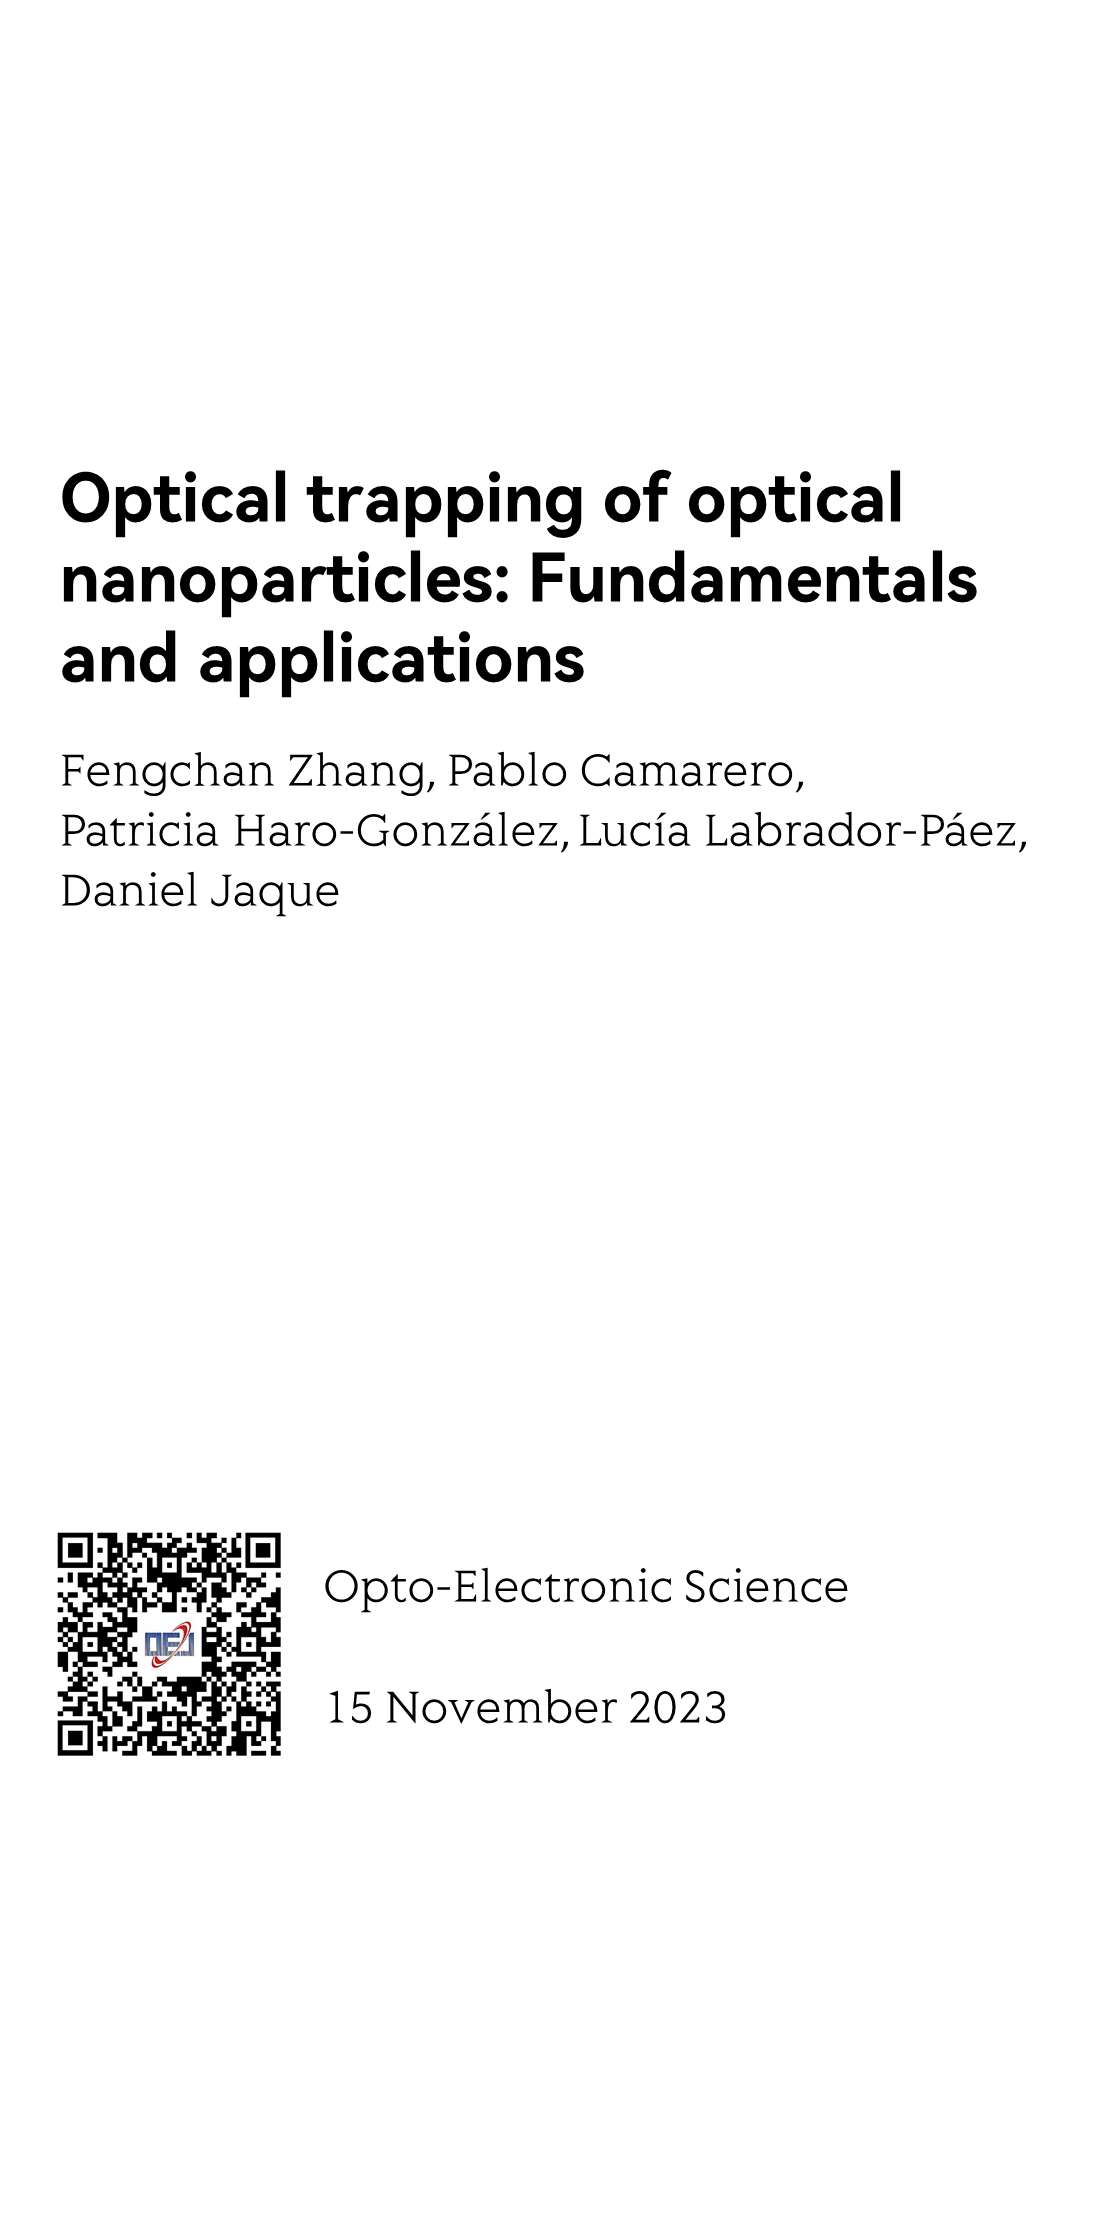 Optical trapping of optical nanoparticles: Fundamentals and applications_1